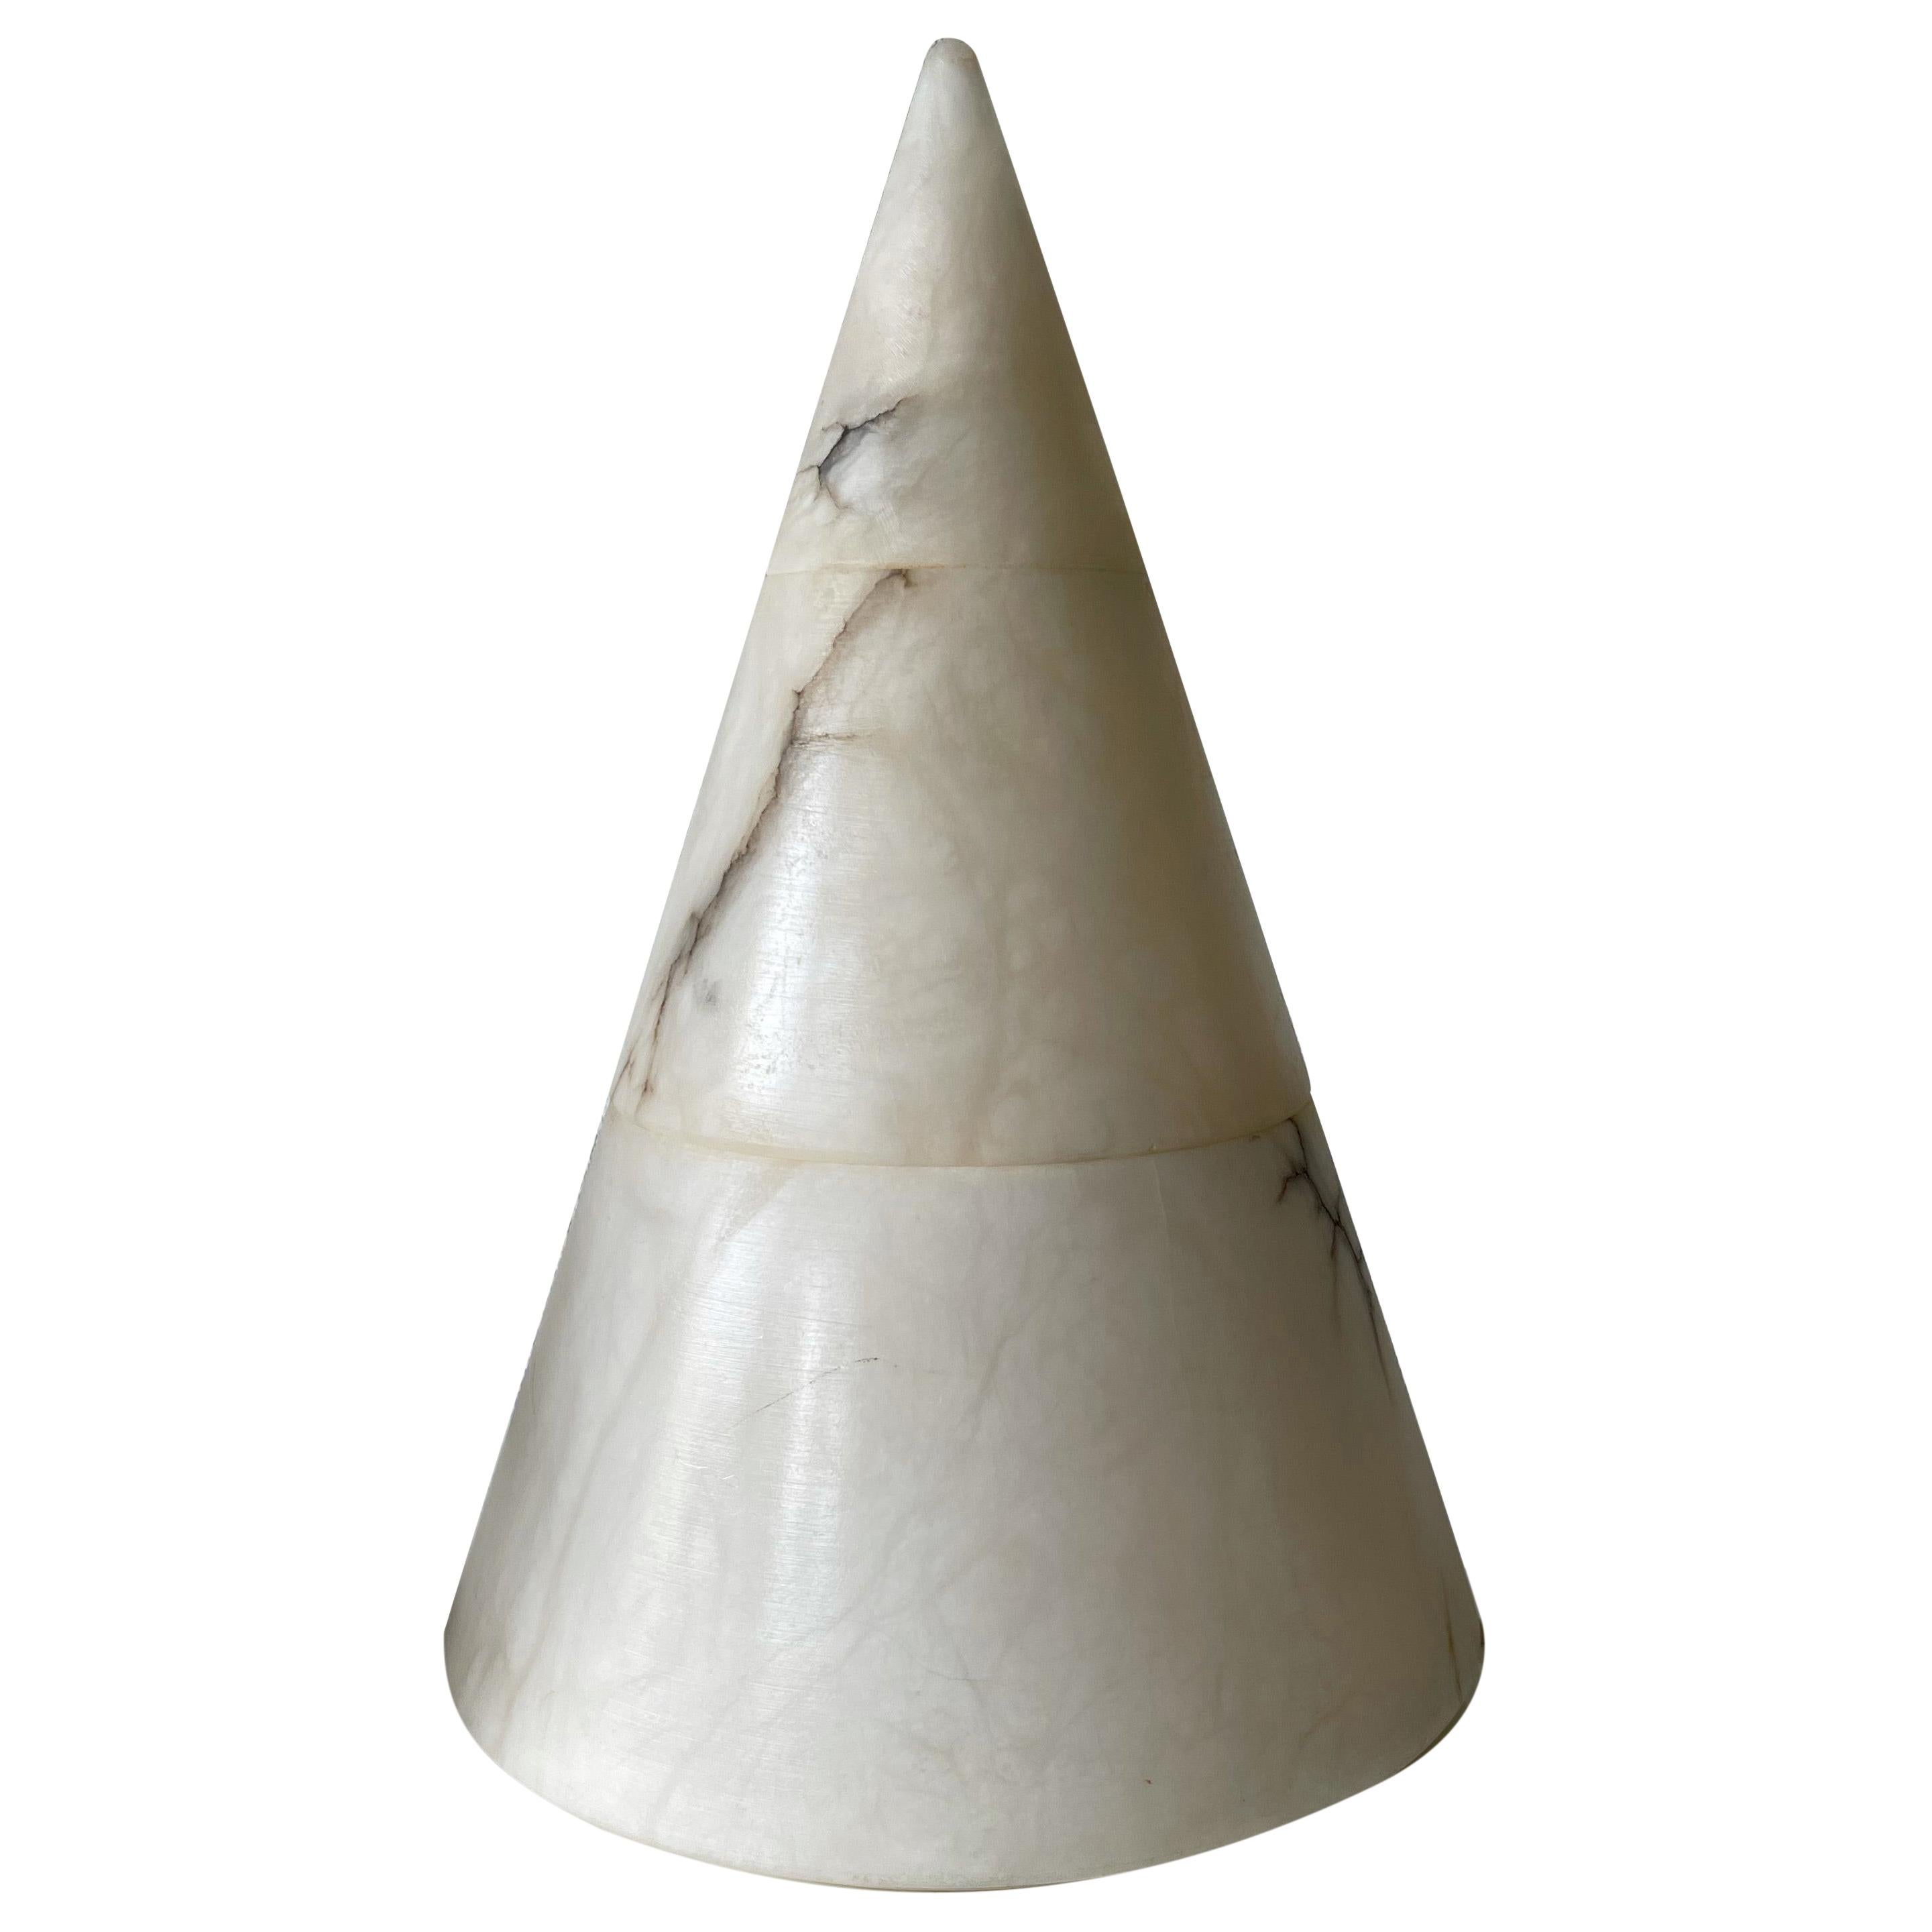 Another Mid-Century Modern Alabaster Pyramid Design and Conical Shape Table Lamp